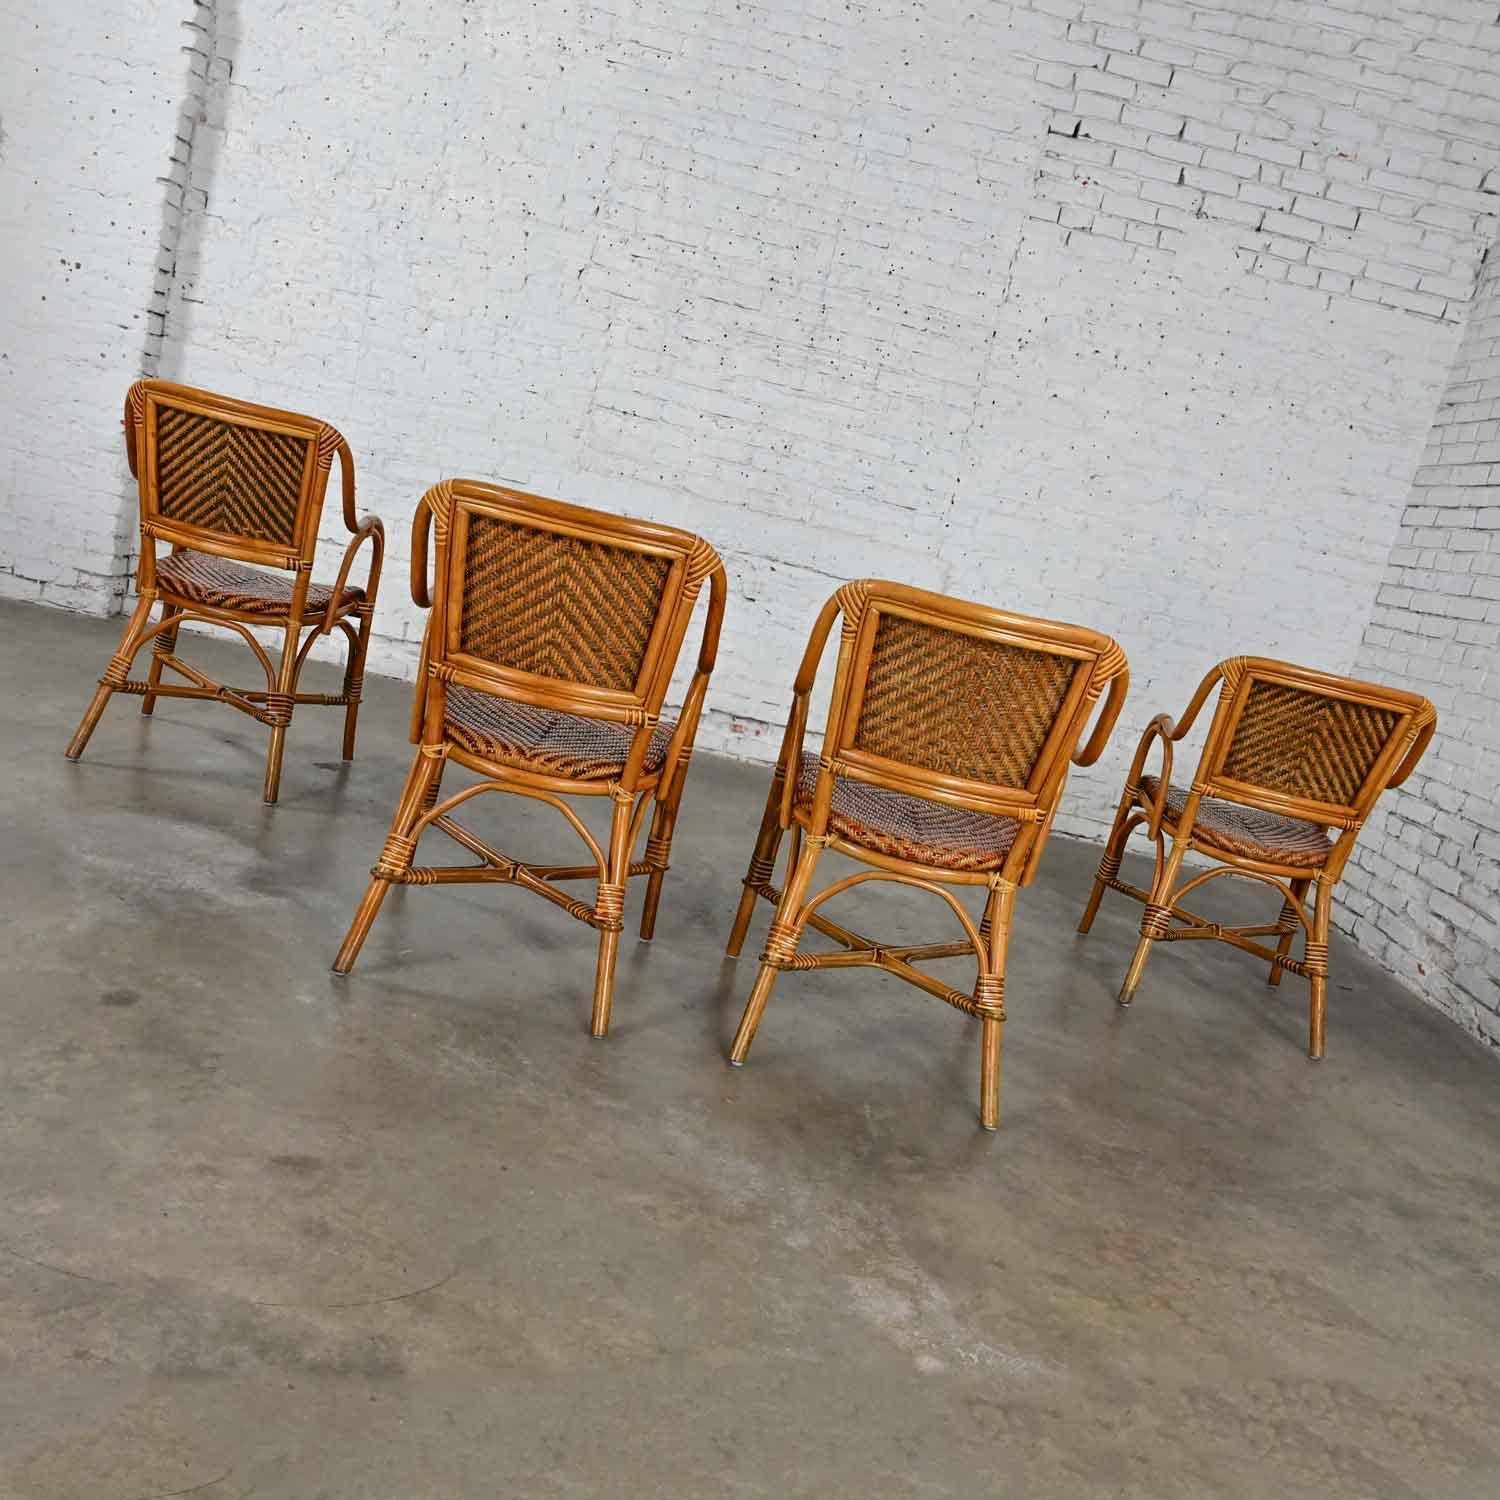 Boho Chic 2 Toned Wicker Rattan Café Bistro or Conservatory Armchairs Set of 4 4